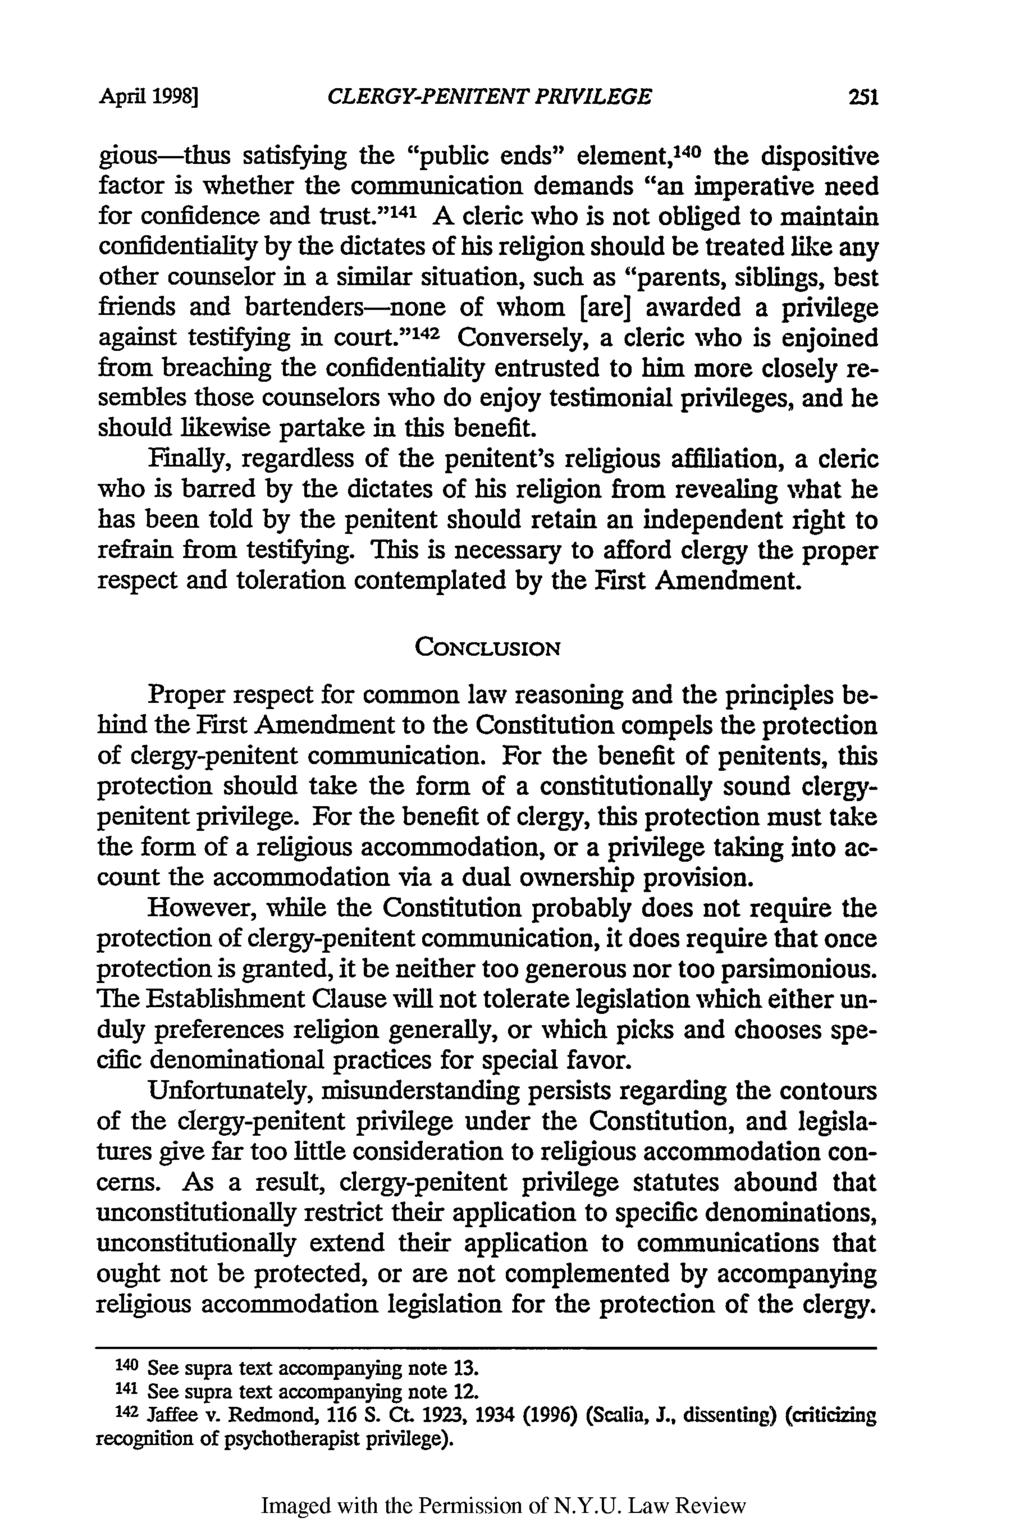 Apri 1998] CLERGY-PENITENT PRIVILEGE gious-thus satisfying the "public ends" element, 140 the dispositive factor is whether the communication demands "an imperative need for confidence and trust.